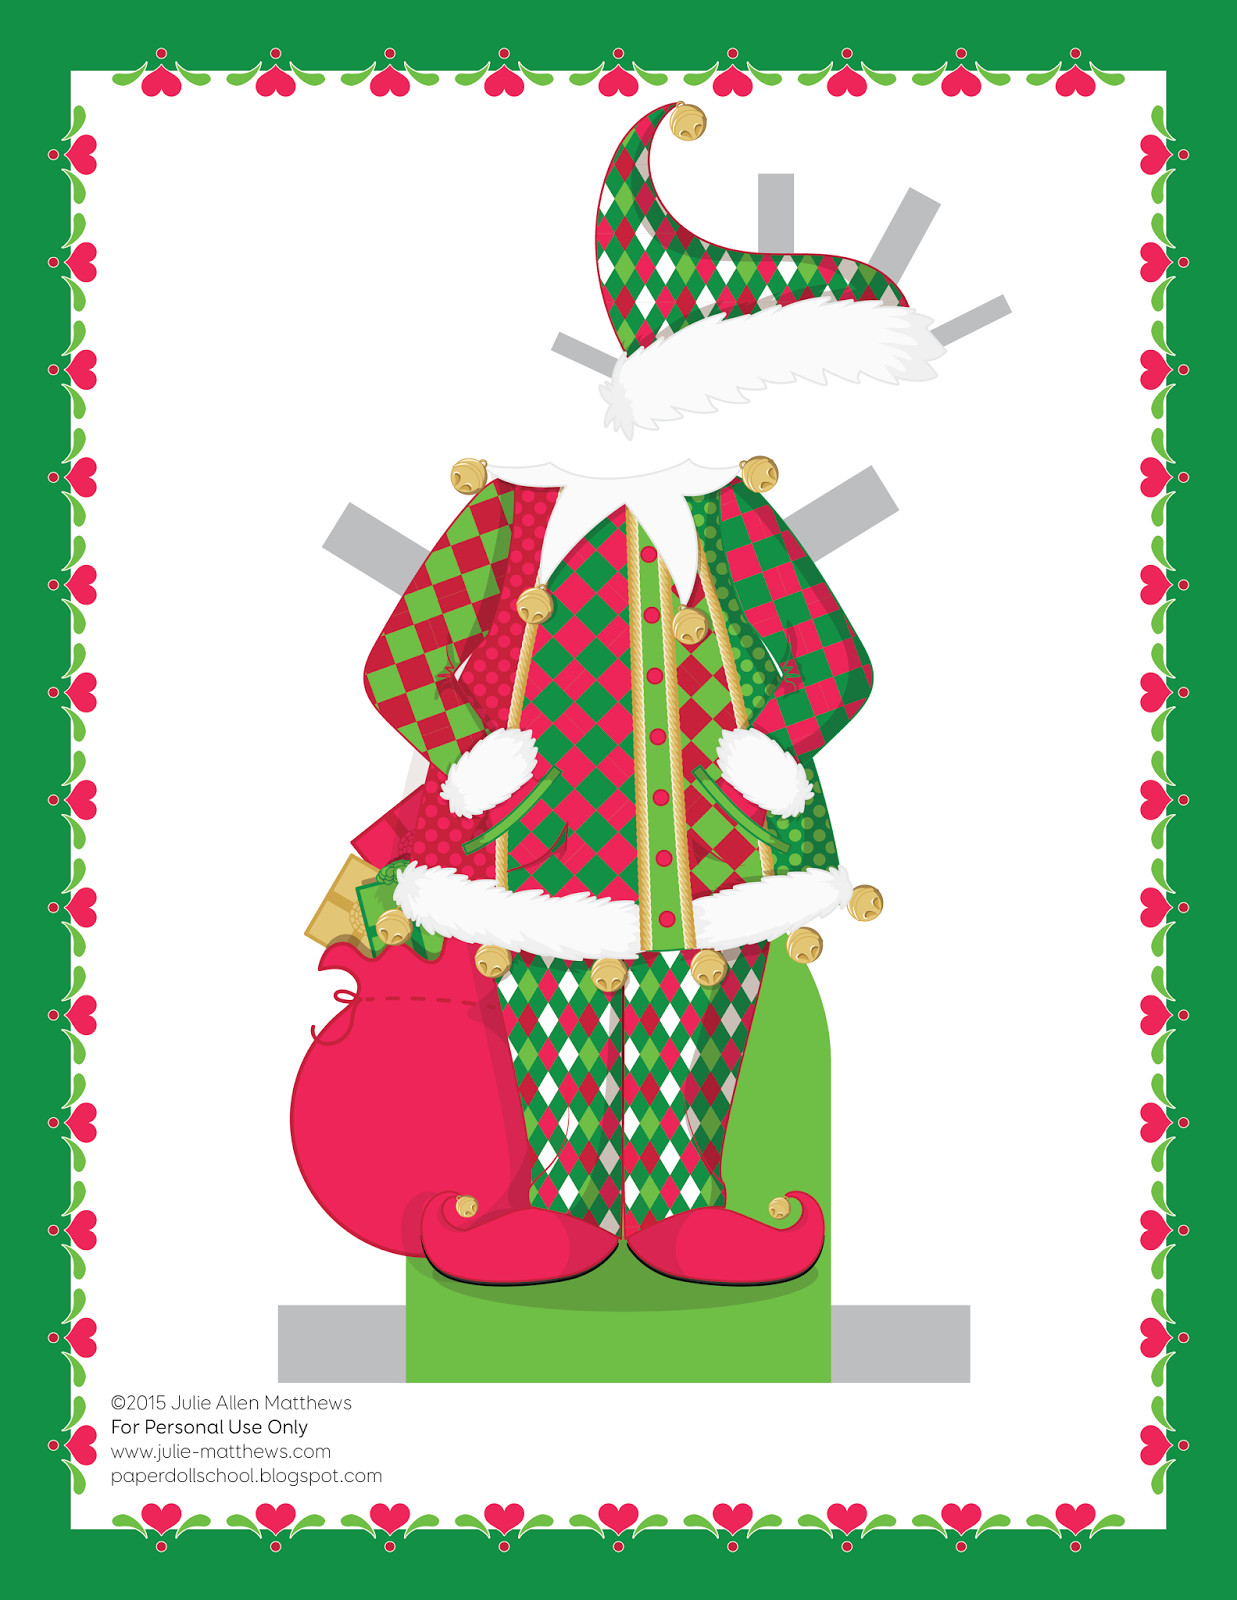 Paper Doll School: December Paper Doll -- Santa, Outfit 2